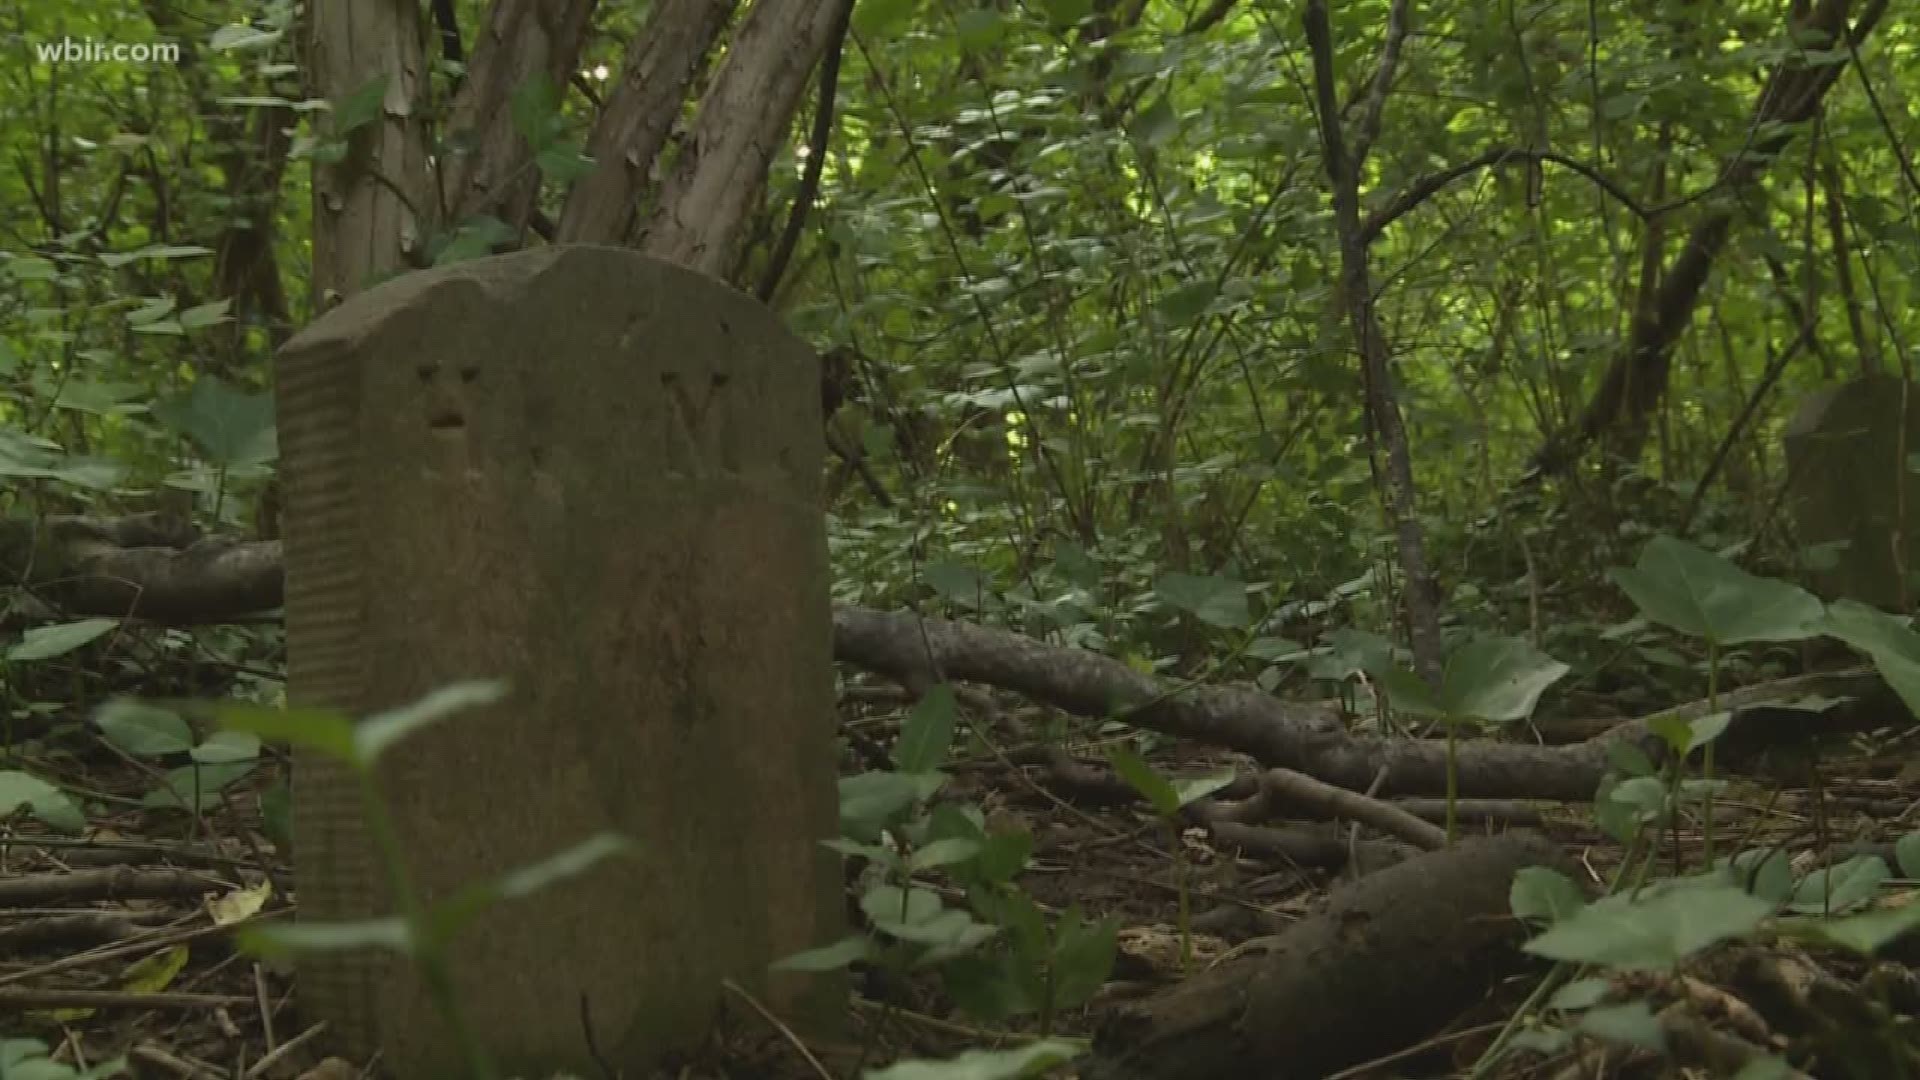 Historians tell us more than 780 cemeteries exist in Knox County. And one expert believes nearly 150 of those are abandoned.